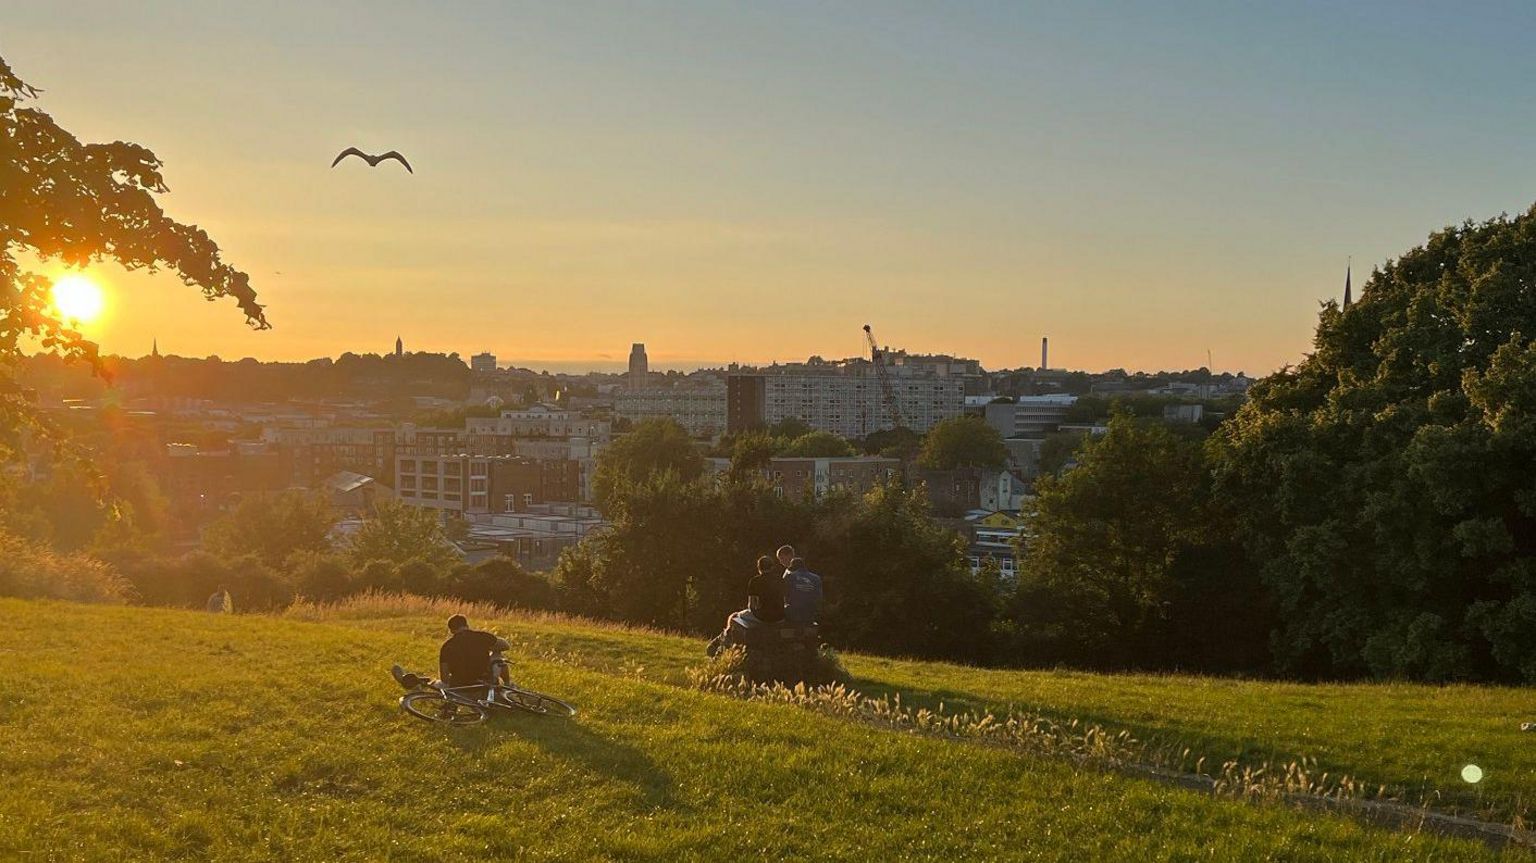 People watch the sun set from Victoria Park in Bristol. Bristol city centre is visible in the background.